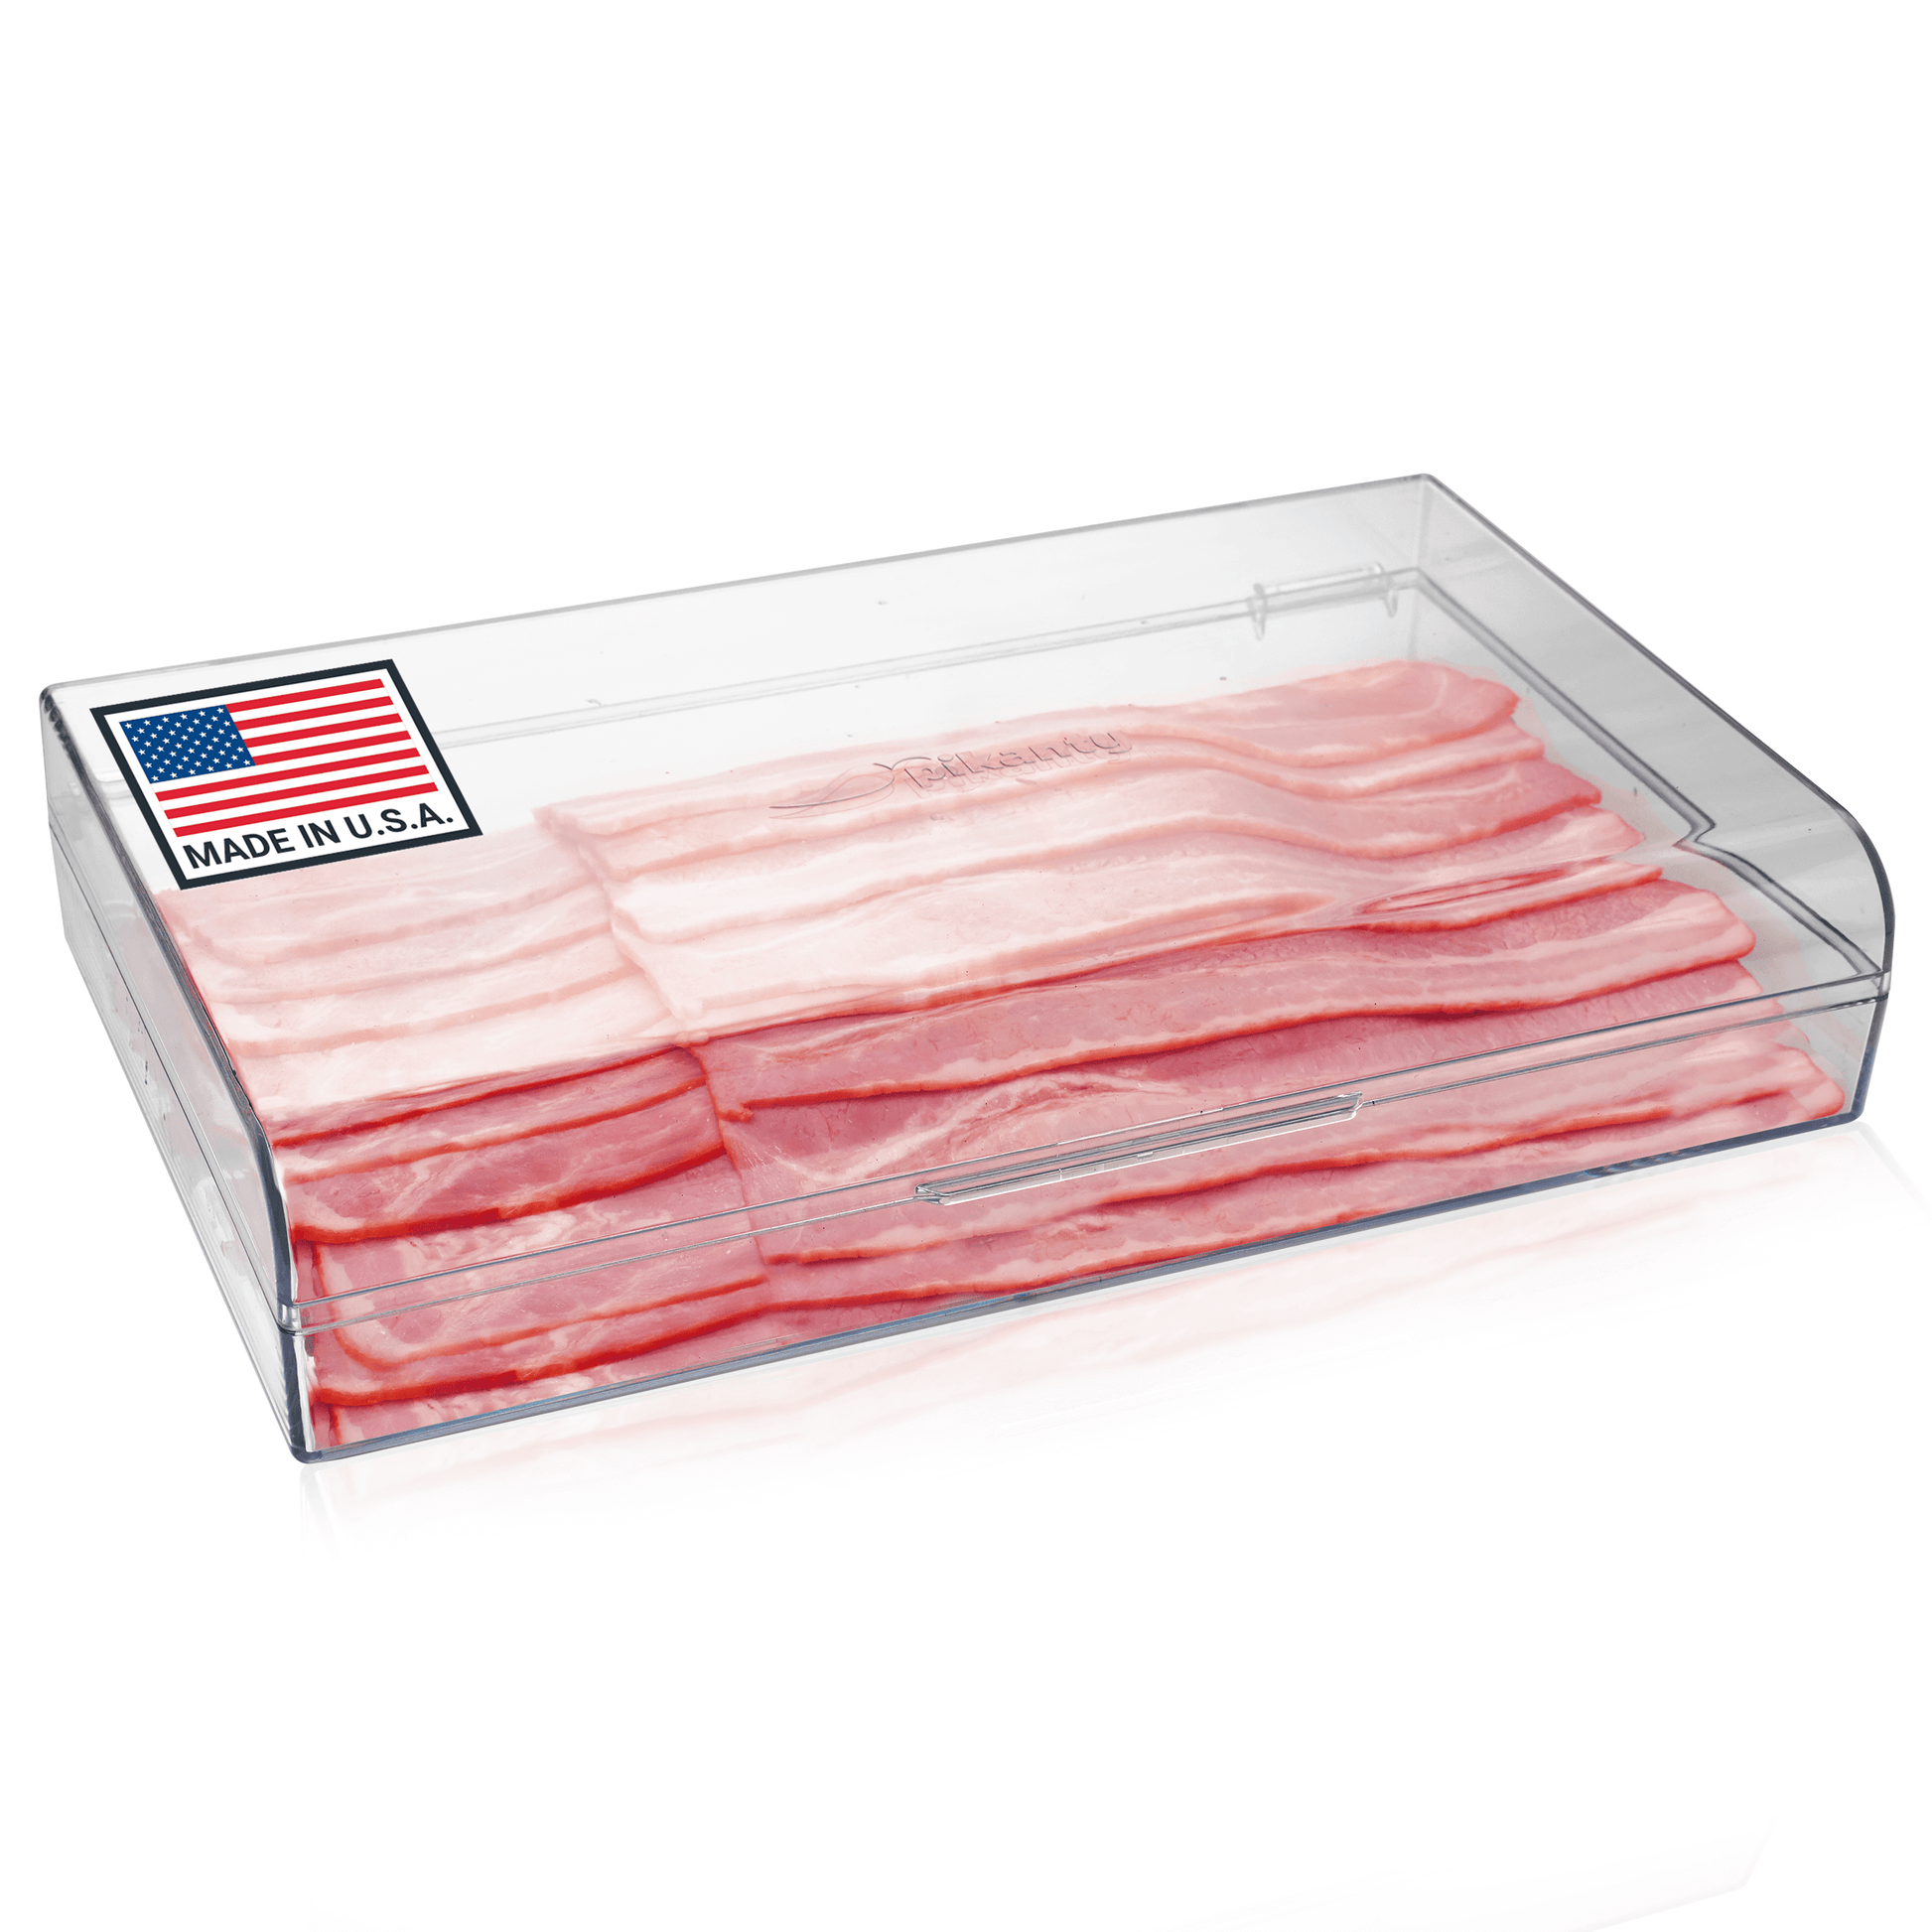 Bacon Saver Deli Meat Preserve Food Storage Containers with